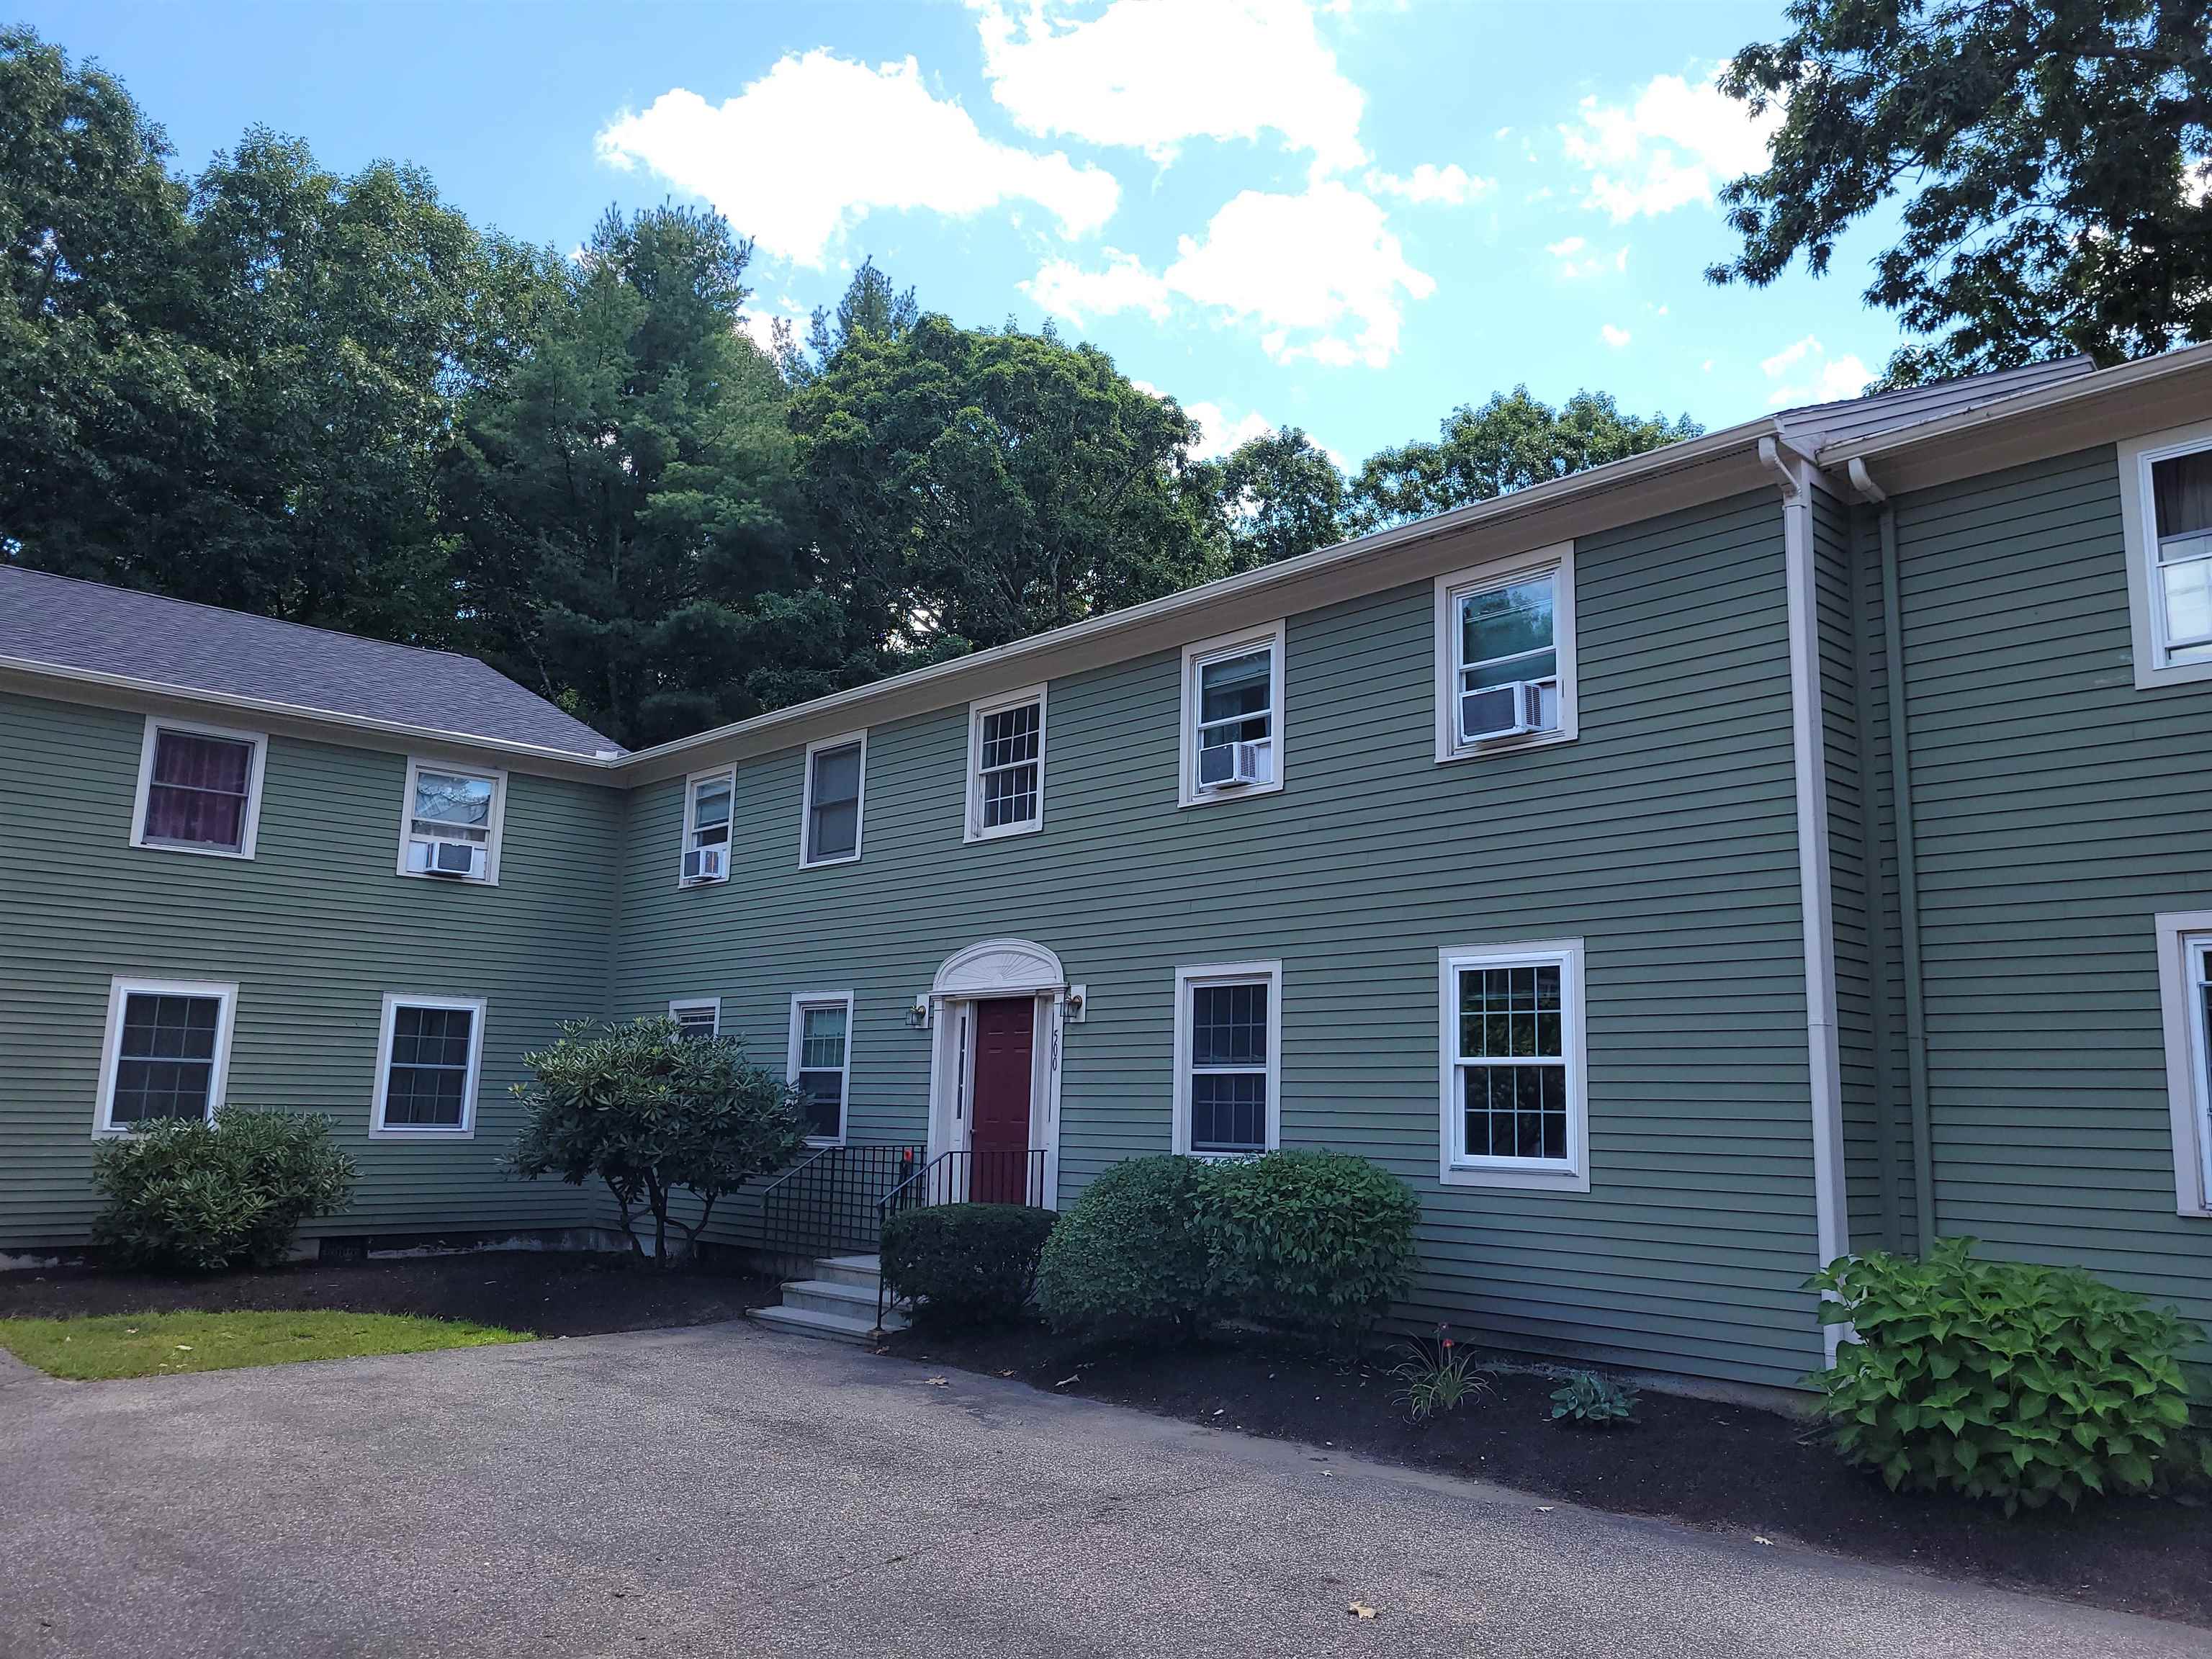 30 Old Dover Road, Rochester, New Hampshire, NH 03867, 2 Bedrooms Bedrooms, 4 Rooms Rooms,1 BathroomBathrooms,Condos,For Sale,4924227